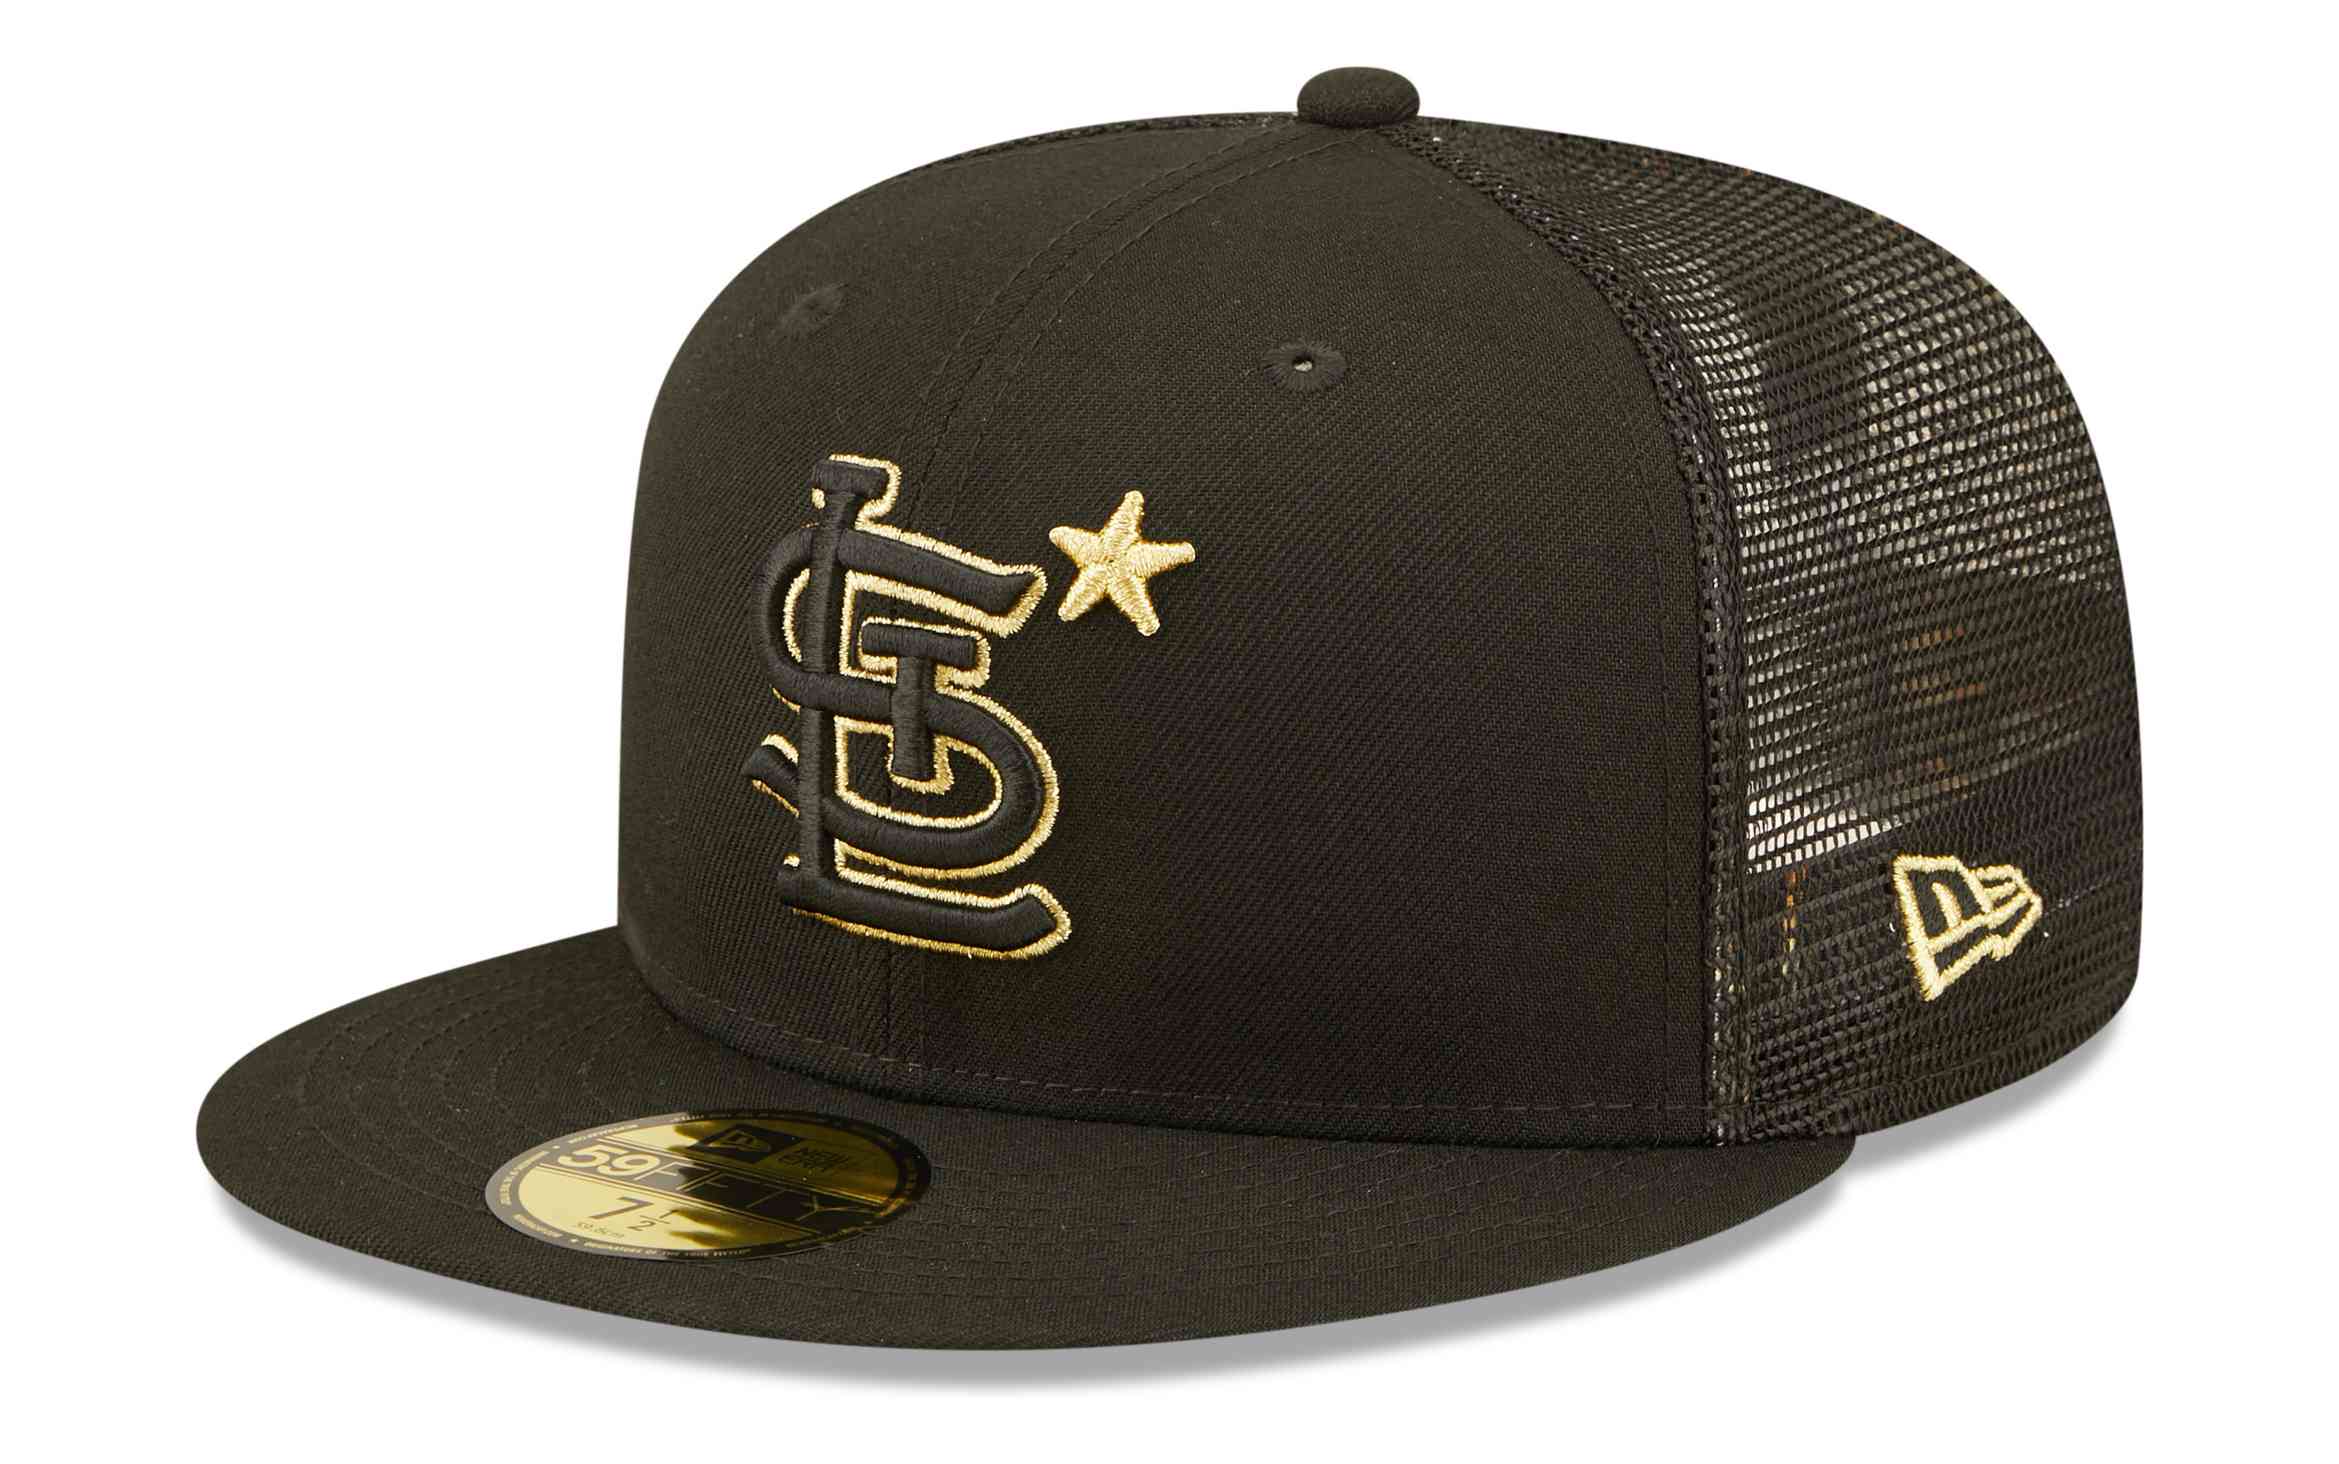 New Era - MLB St. Louis Cardinals All Star Game Patch 59Fifty Fitted Cap